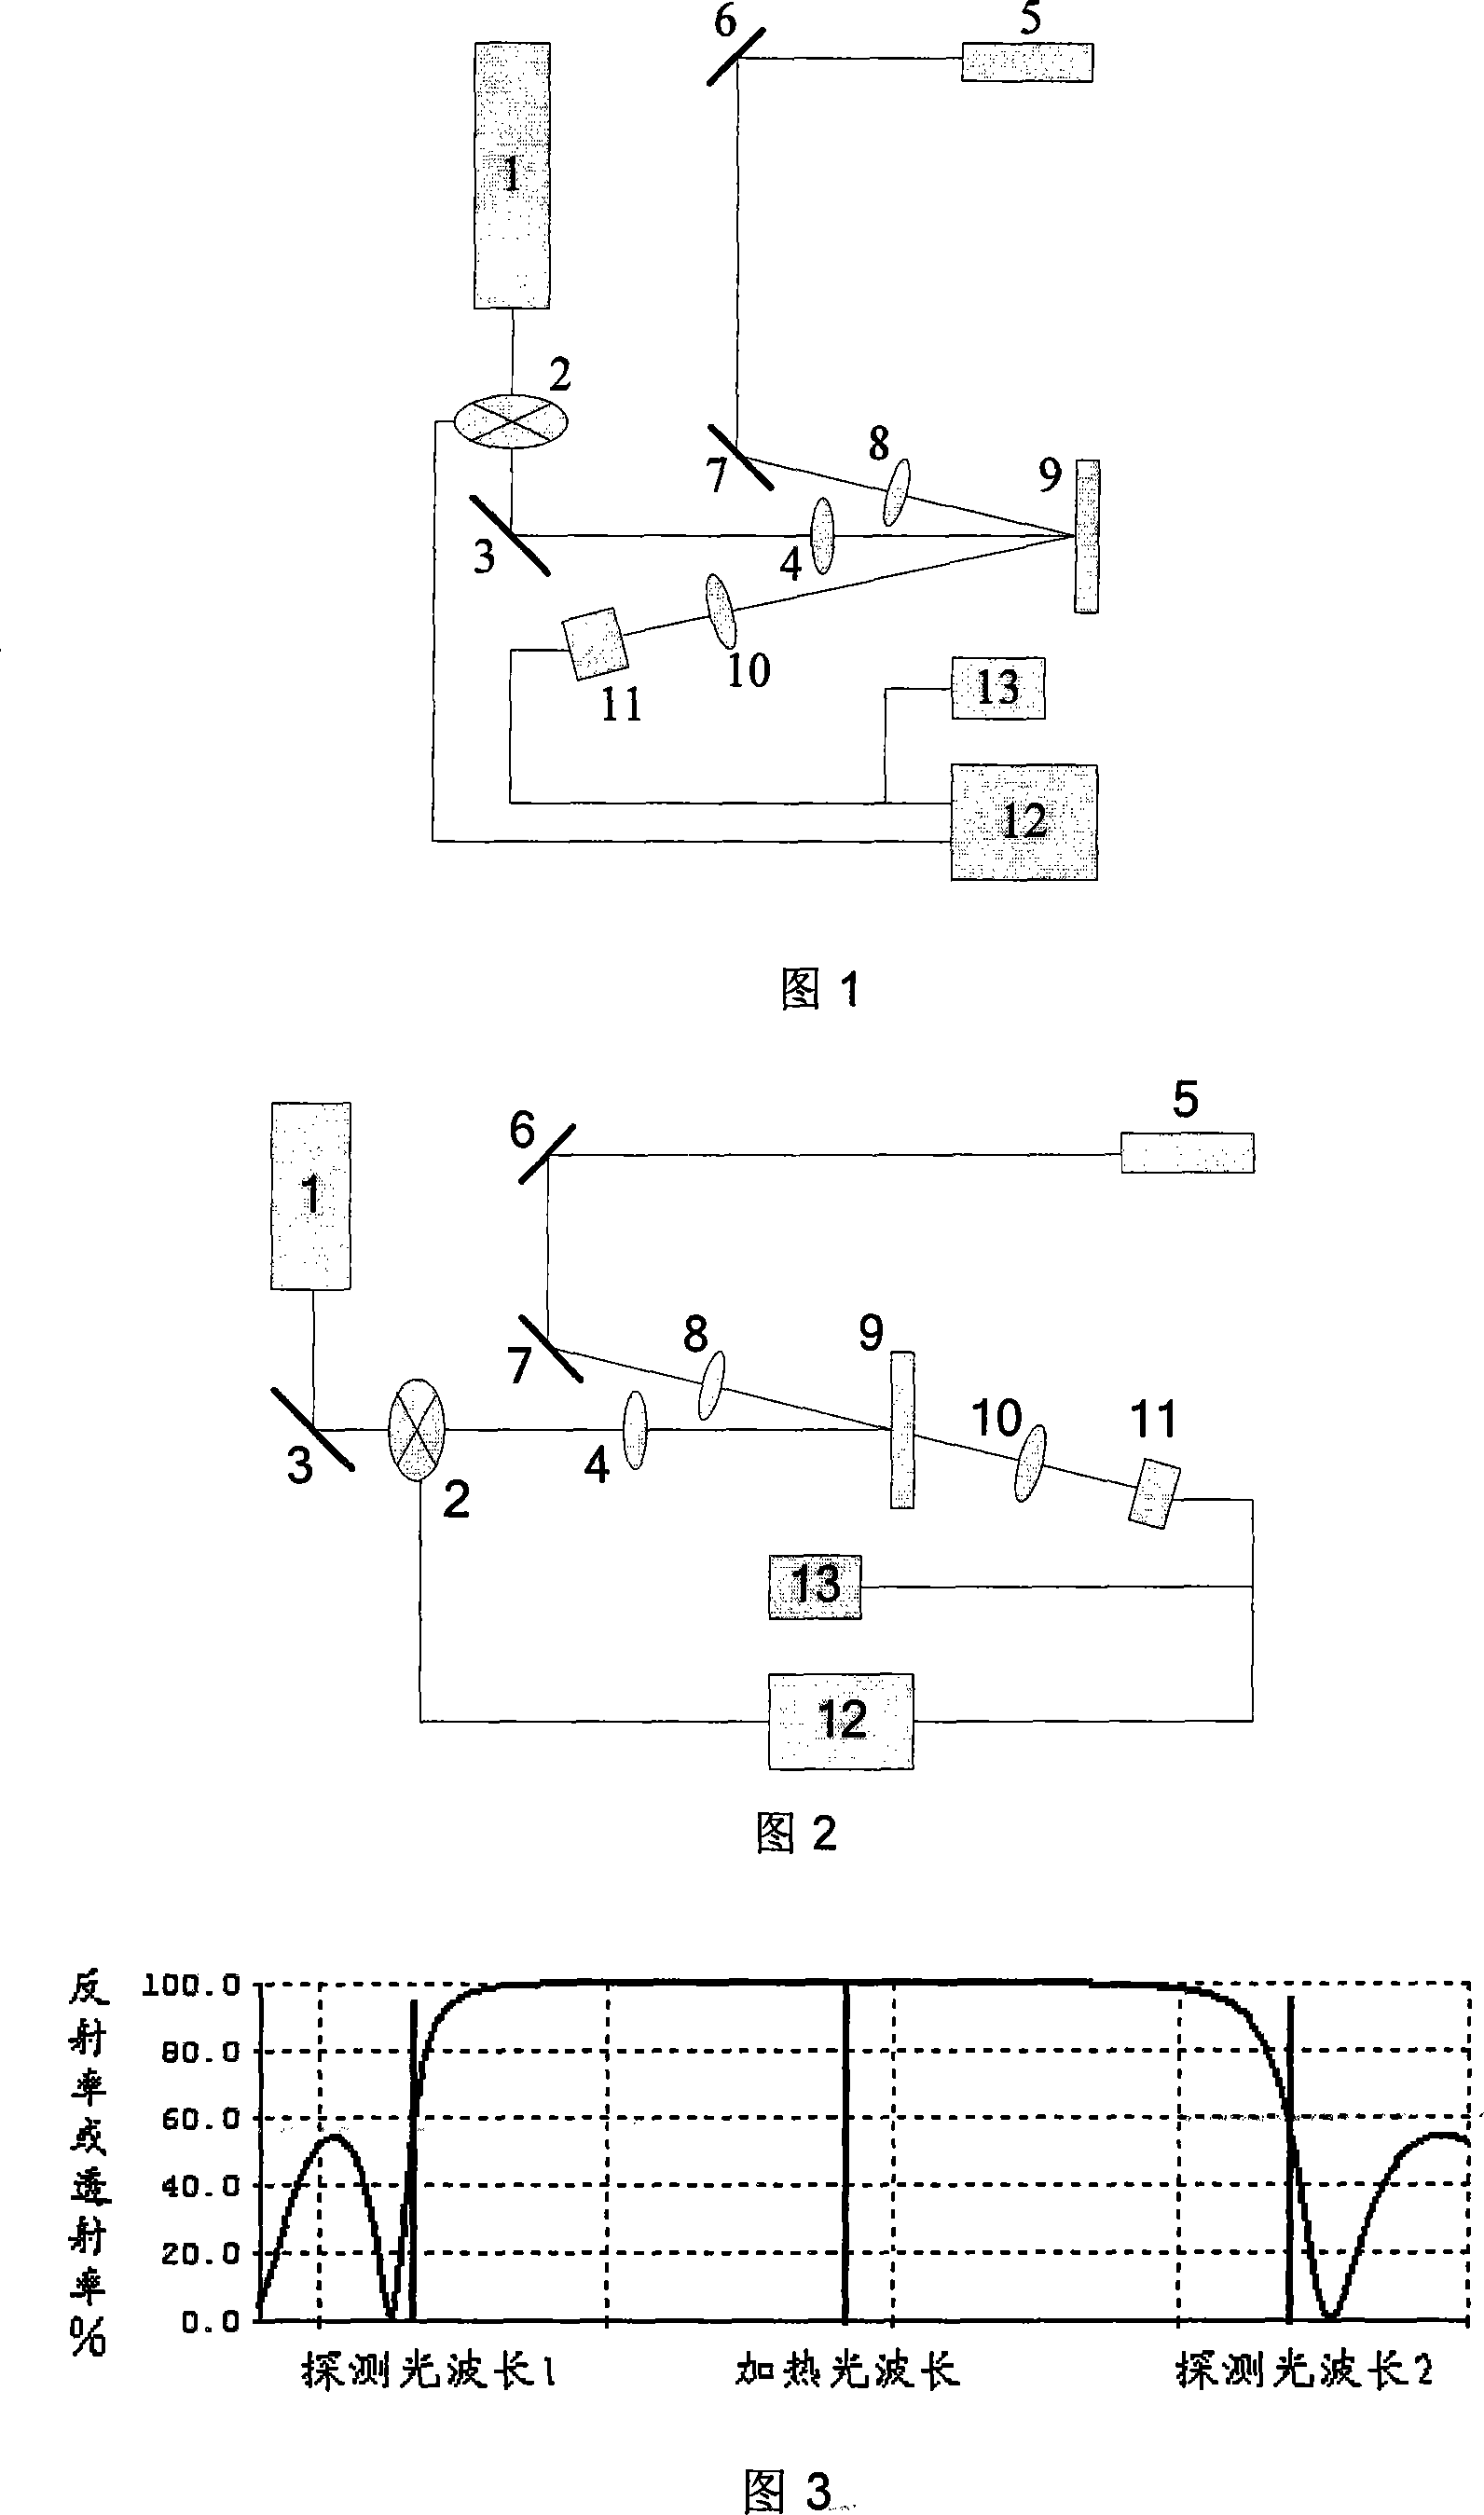 Method for measuring optical film absorption loss